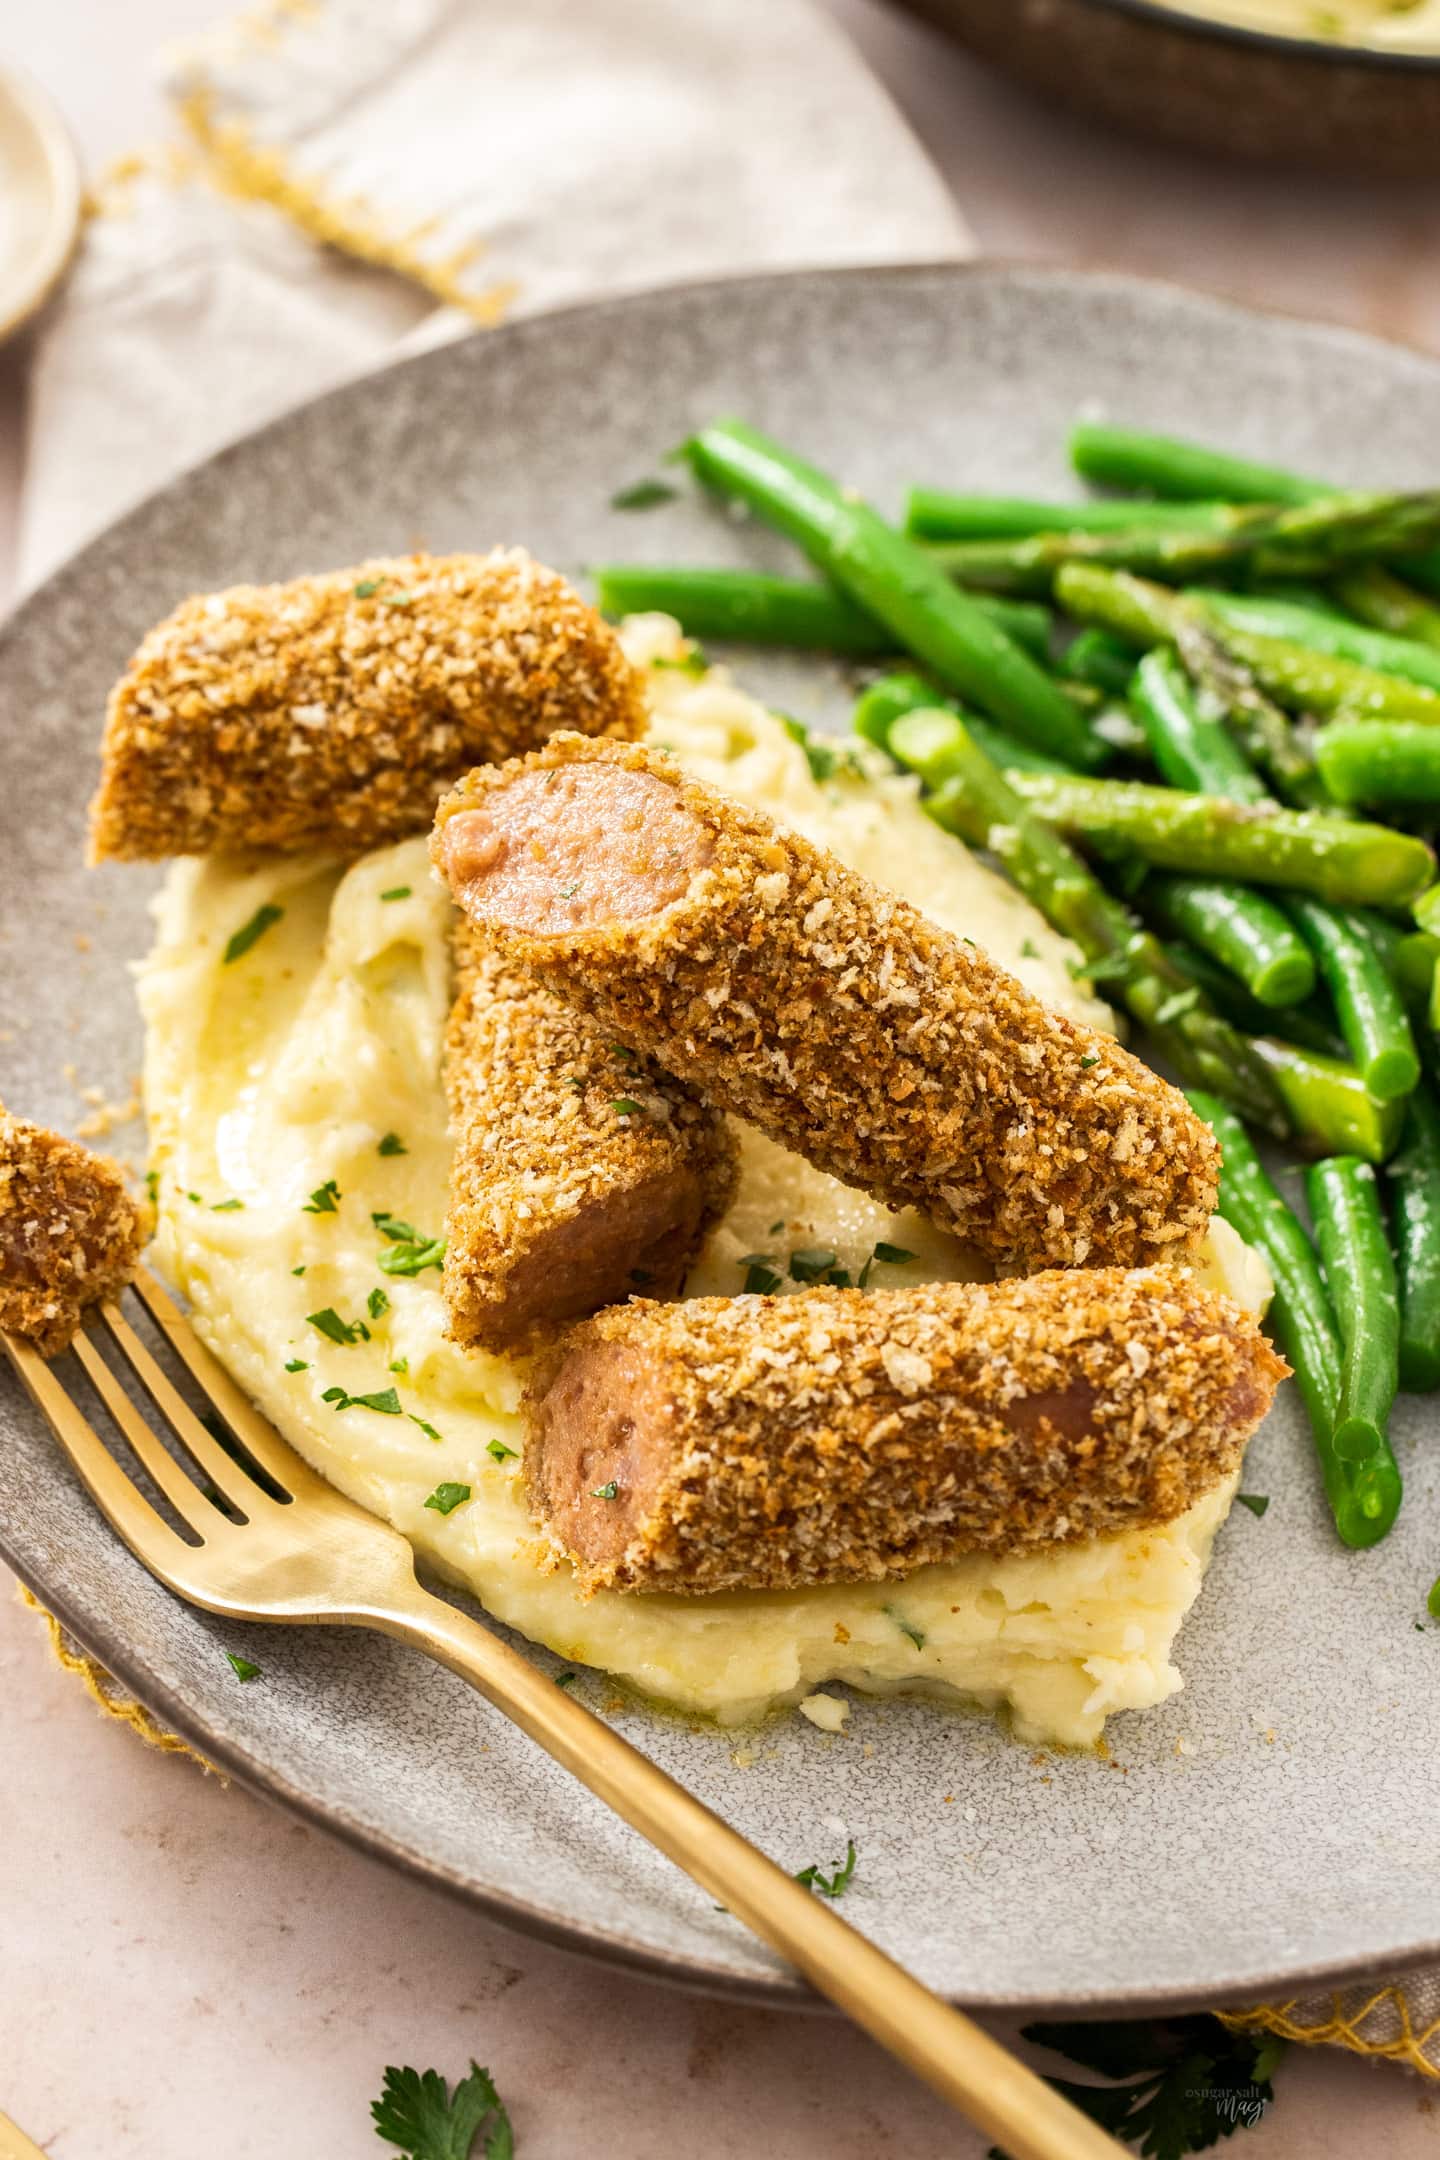 Closeup of cut up crumbed sausages on top of mashed potato.